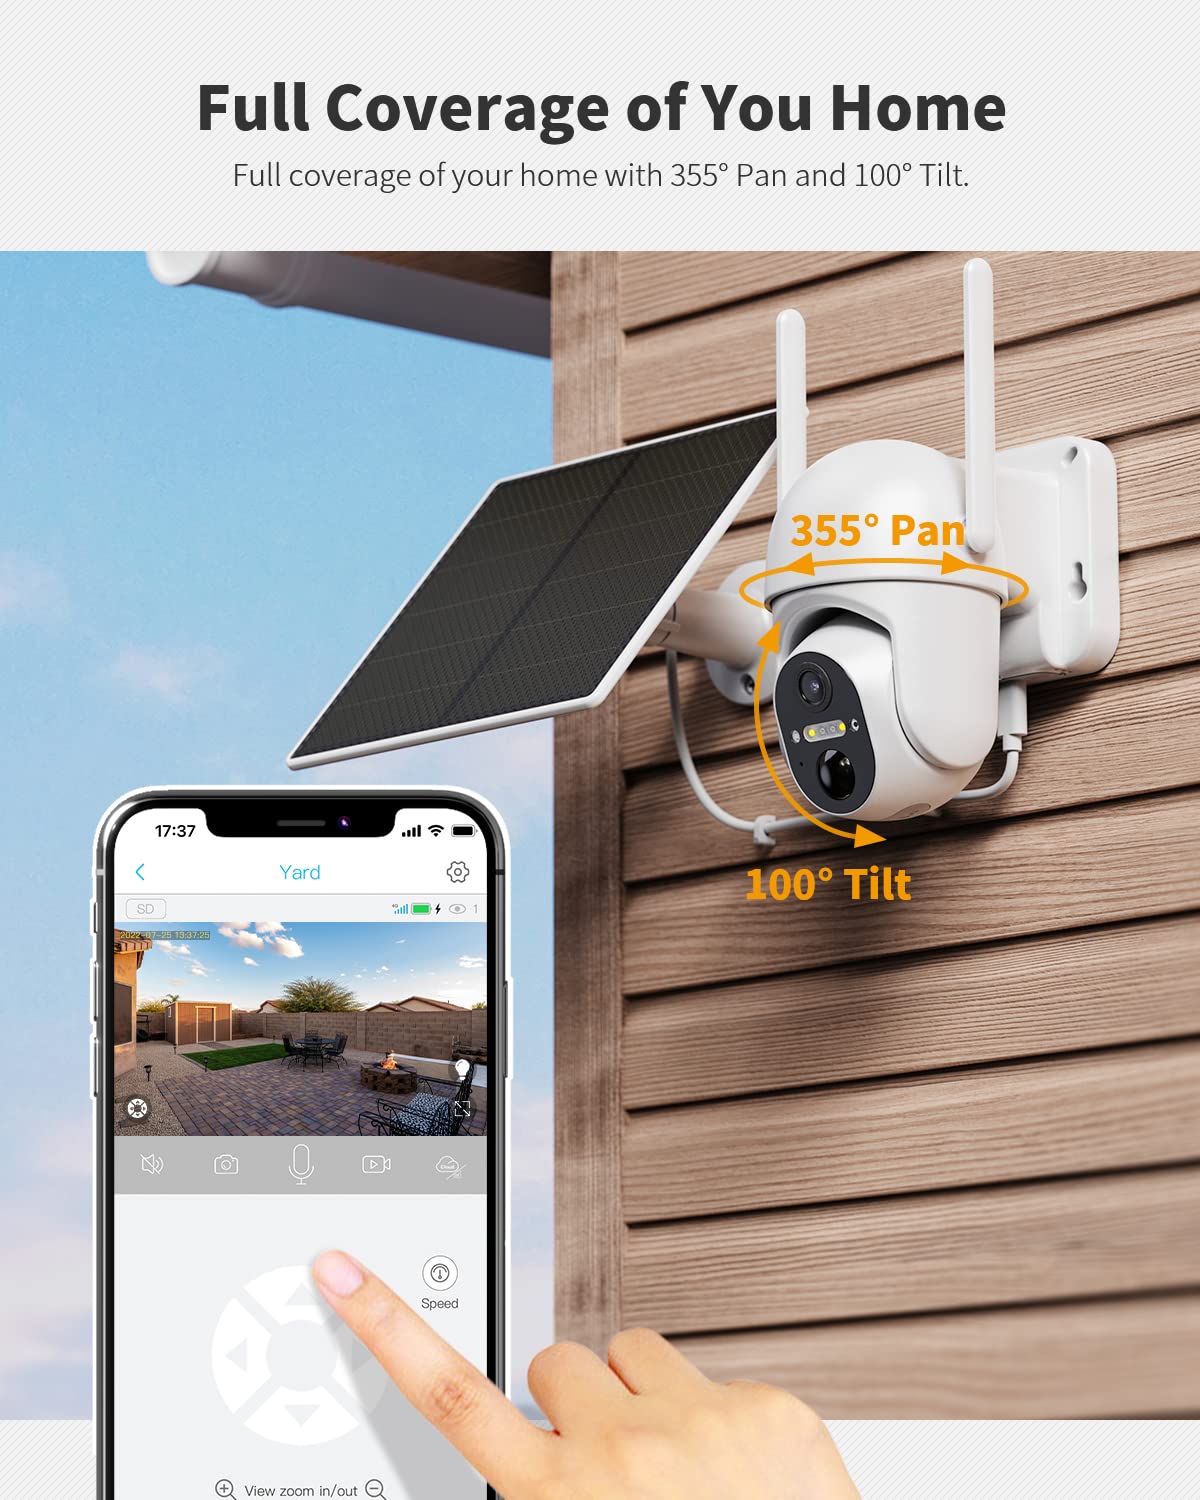 Ebitcam 4G LTE Cellular Security Camera Includes SD&SIM Card (Verizon/AT&T/T-Mobile), Works Without WiFi, Solar Powered, 2K Live Video&Playback, 360° Full Cover, Color Night Vision, Motion&Siren Alert